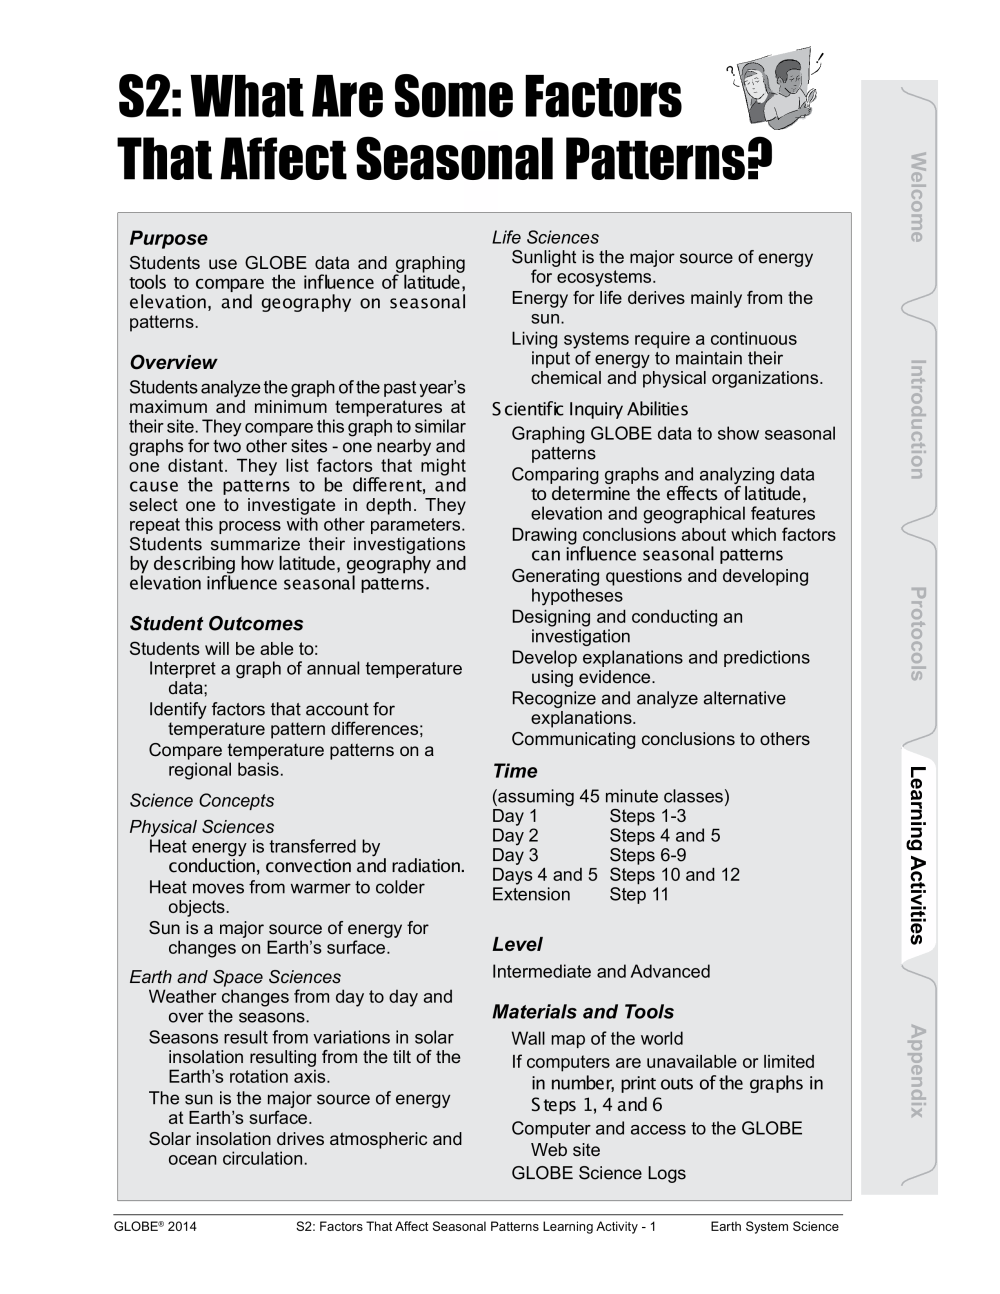 Learning Activities preview for S2-What Are Some Factors That Affect Seasonal Patterns